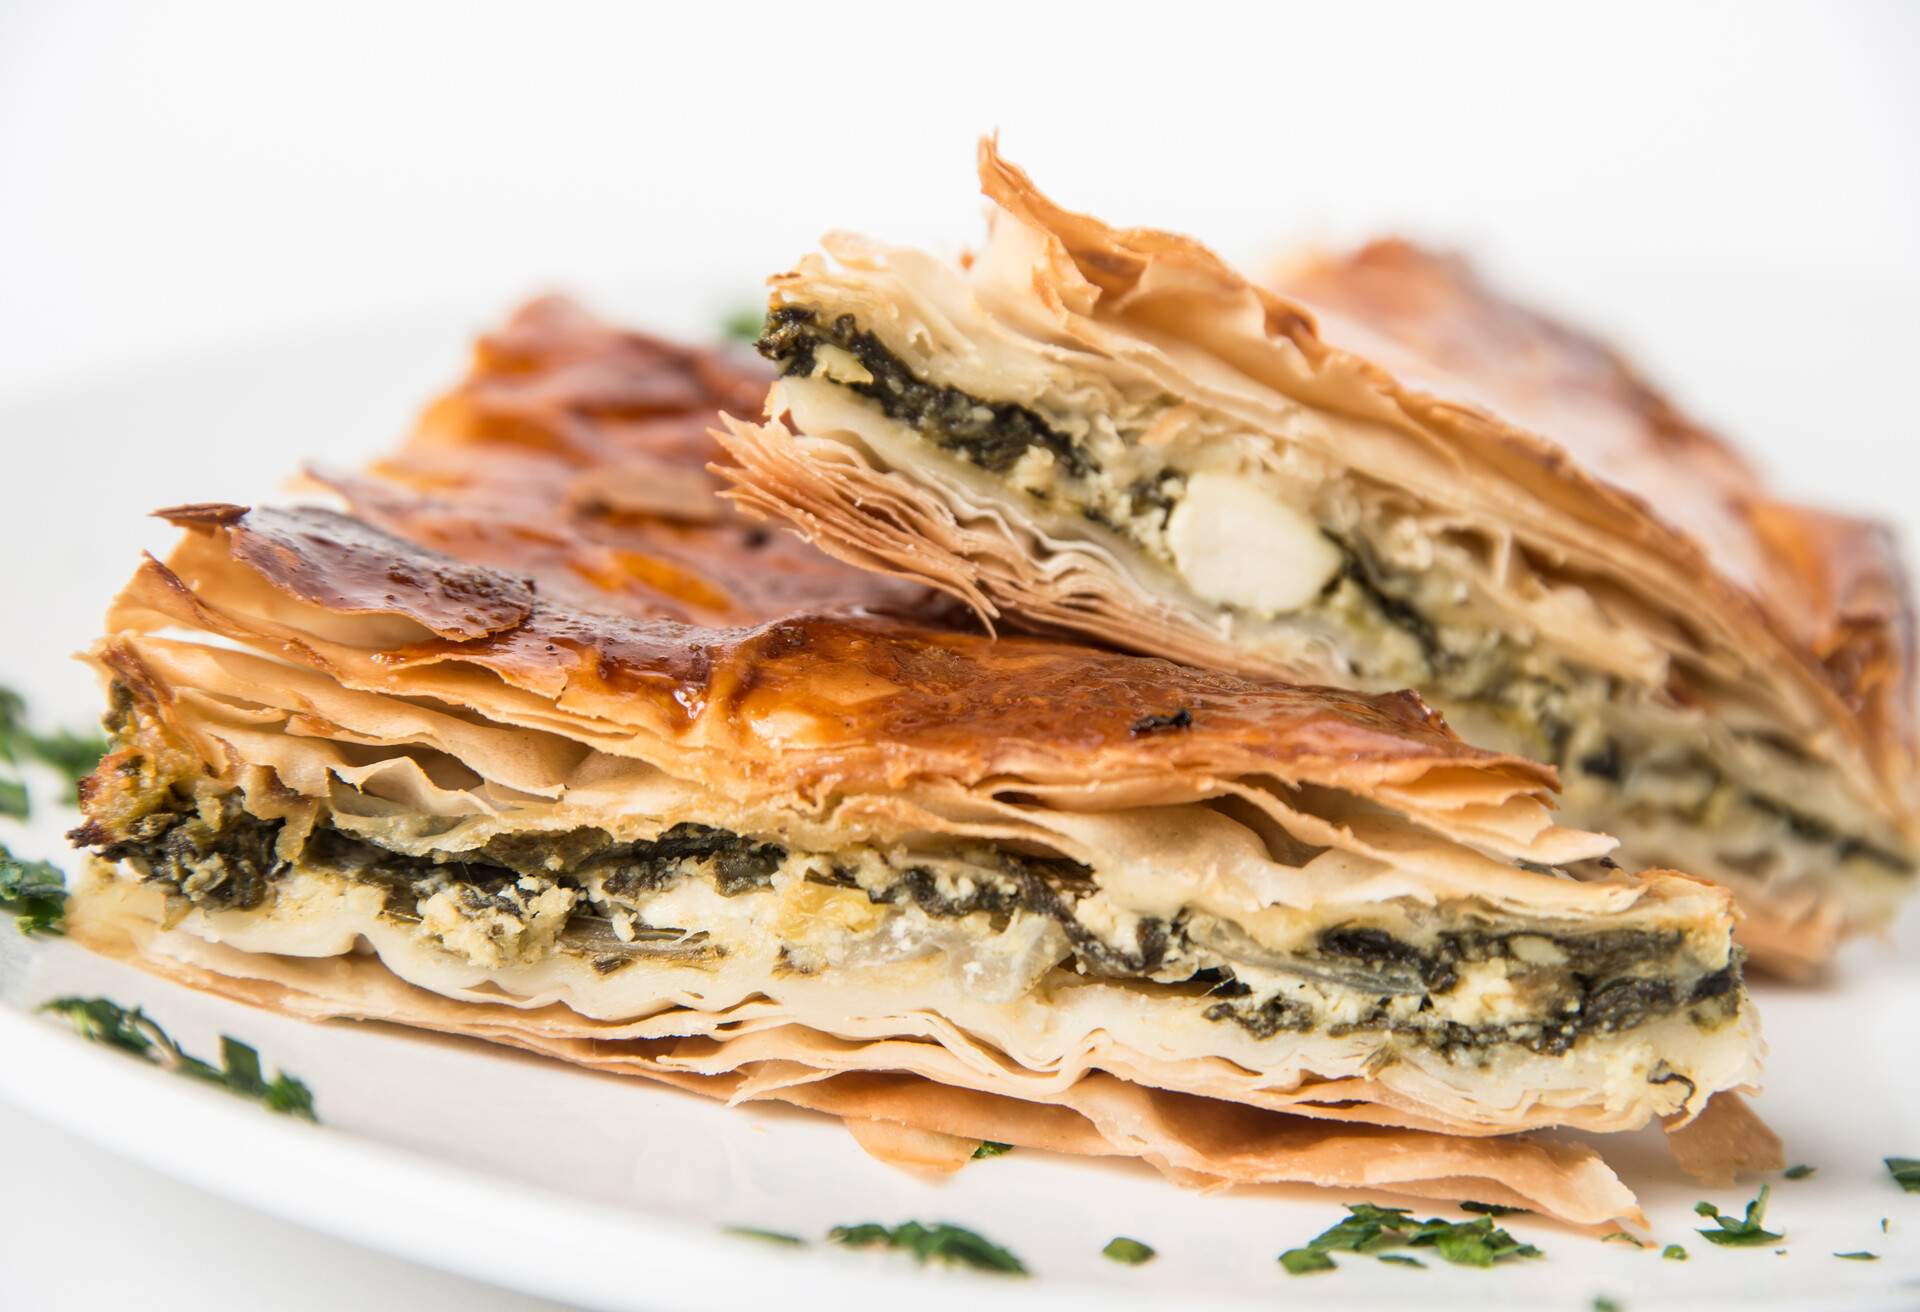 Spanakopita is a Greek pastry filled with spinach and cheese